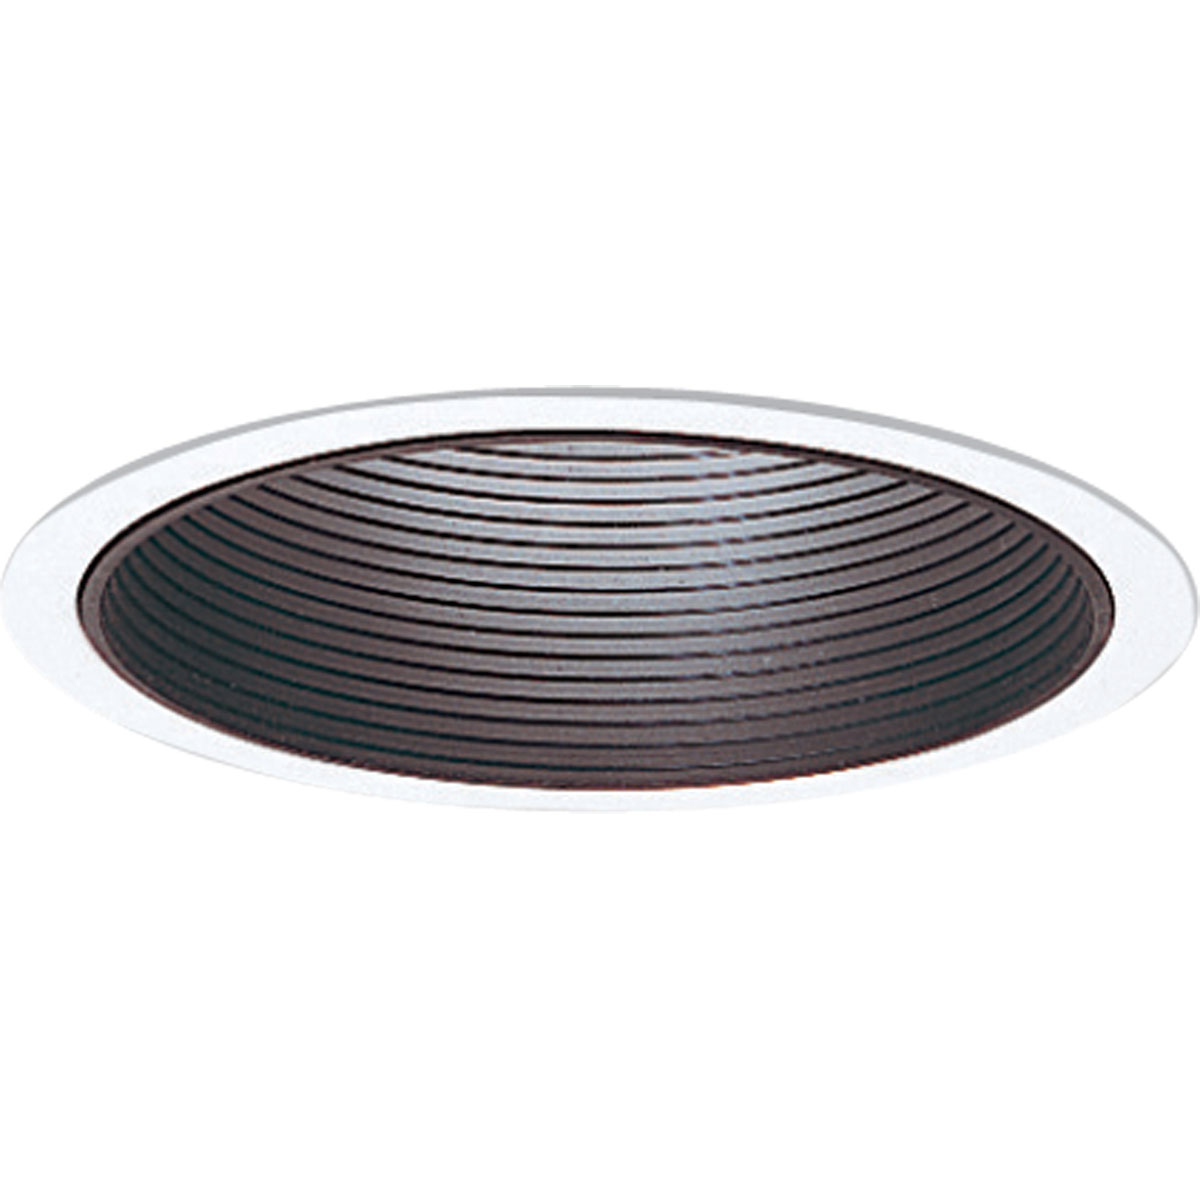 A multi-groove Step Baffle in a Black finish for use with insulated ceilings. 7-3/4 in outside diameter.